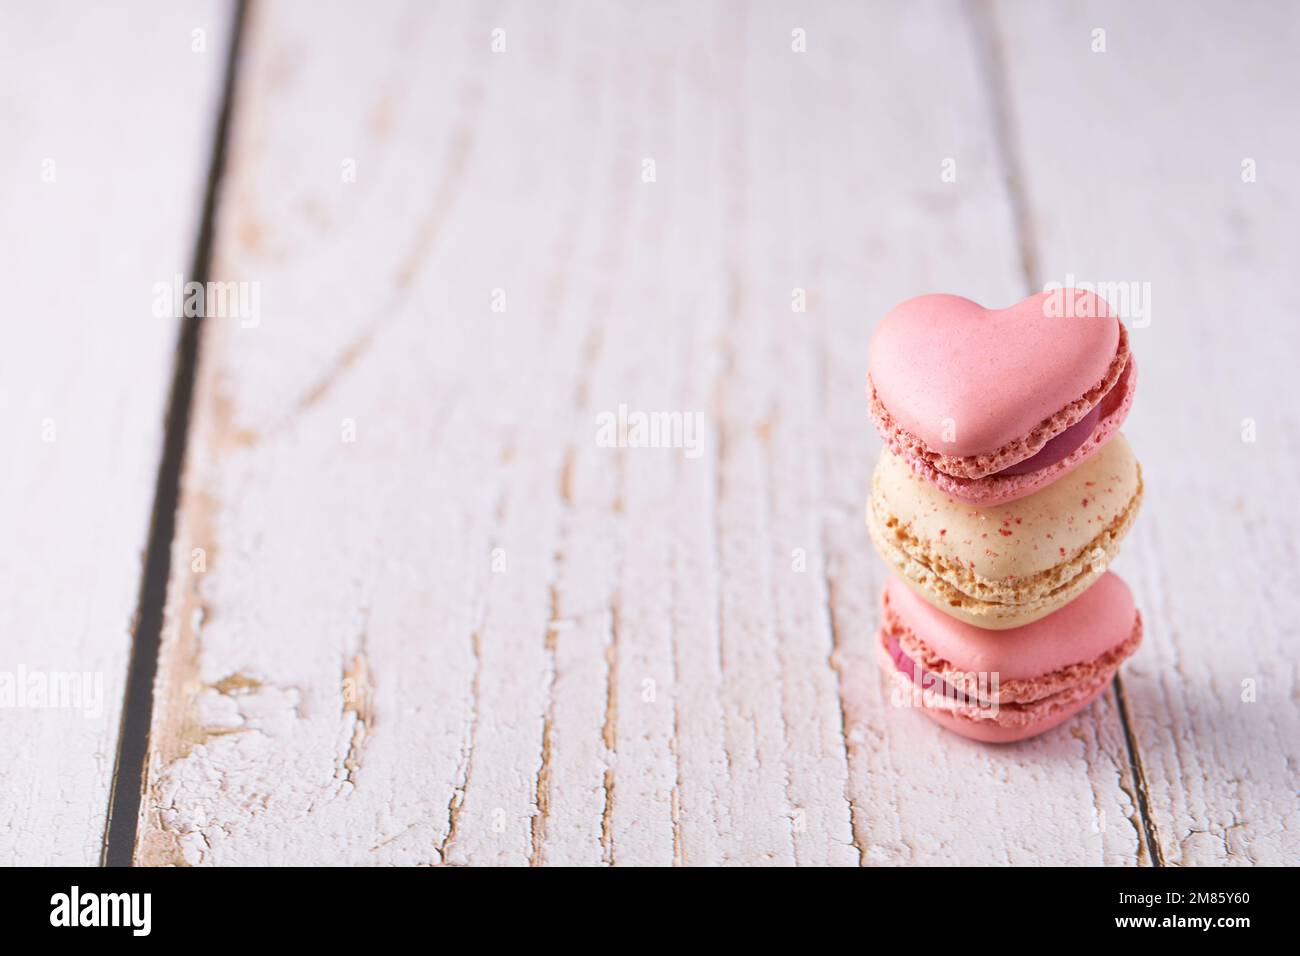 Stack of three heart shaped cream filled French macaroons on white wooden background. Confections for Valentine's Day, Mother's Day or Wedding. Stock Photo